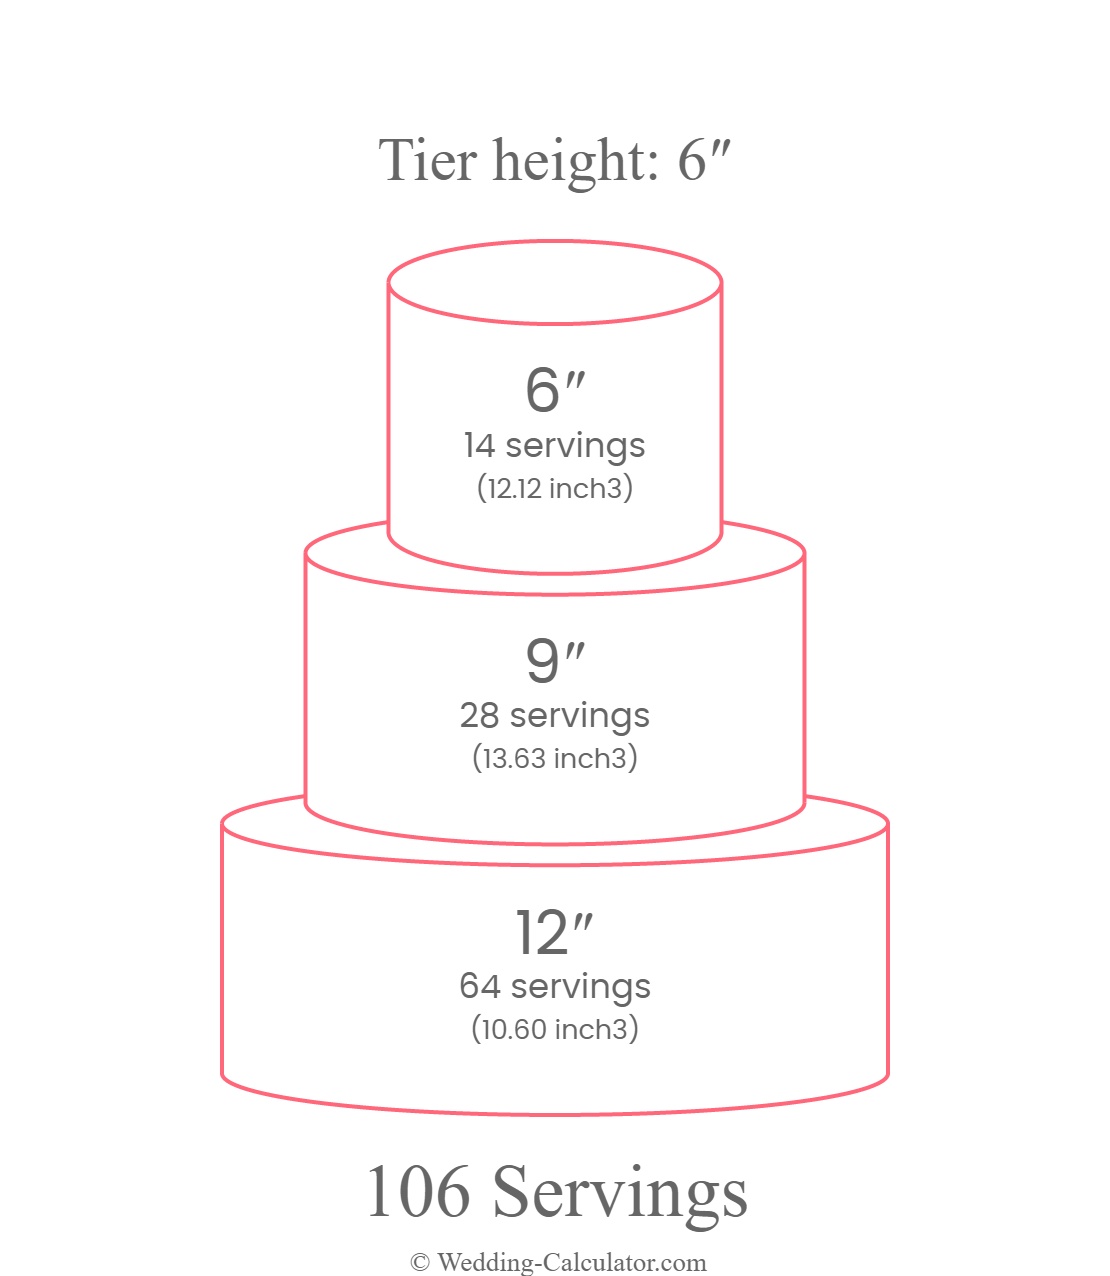 Servings chart for a round 3 tier wedding cake for 106 servings with 12″, 9″ & 6″ diameter tiers